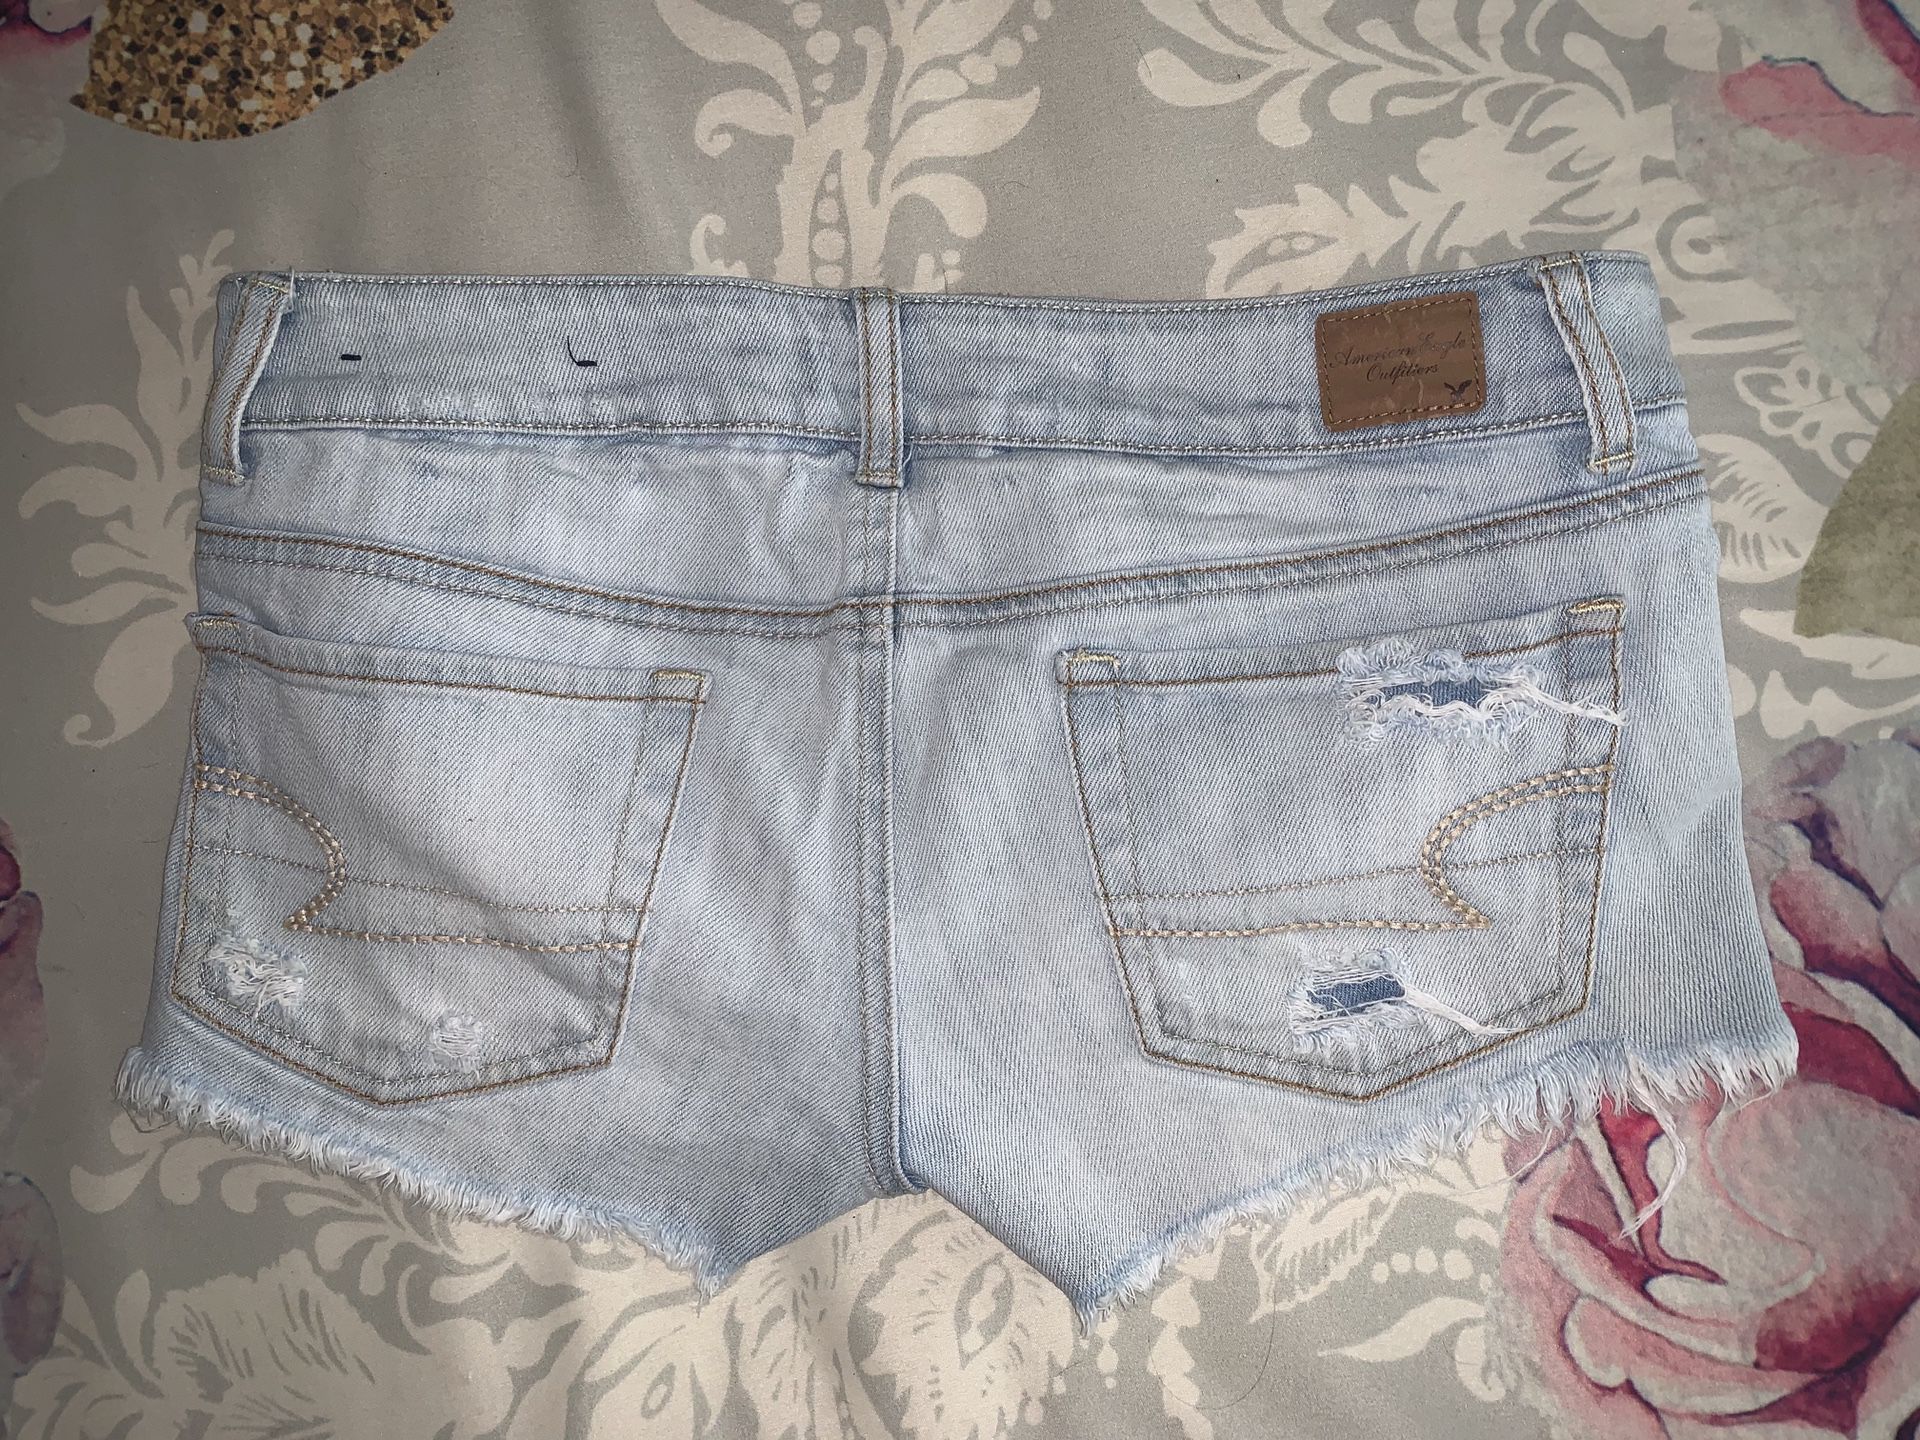 American Eagle Ripped Shorts for Sale in Fort Lauderdale, FL - OfferUp